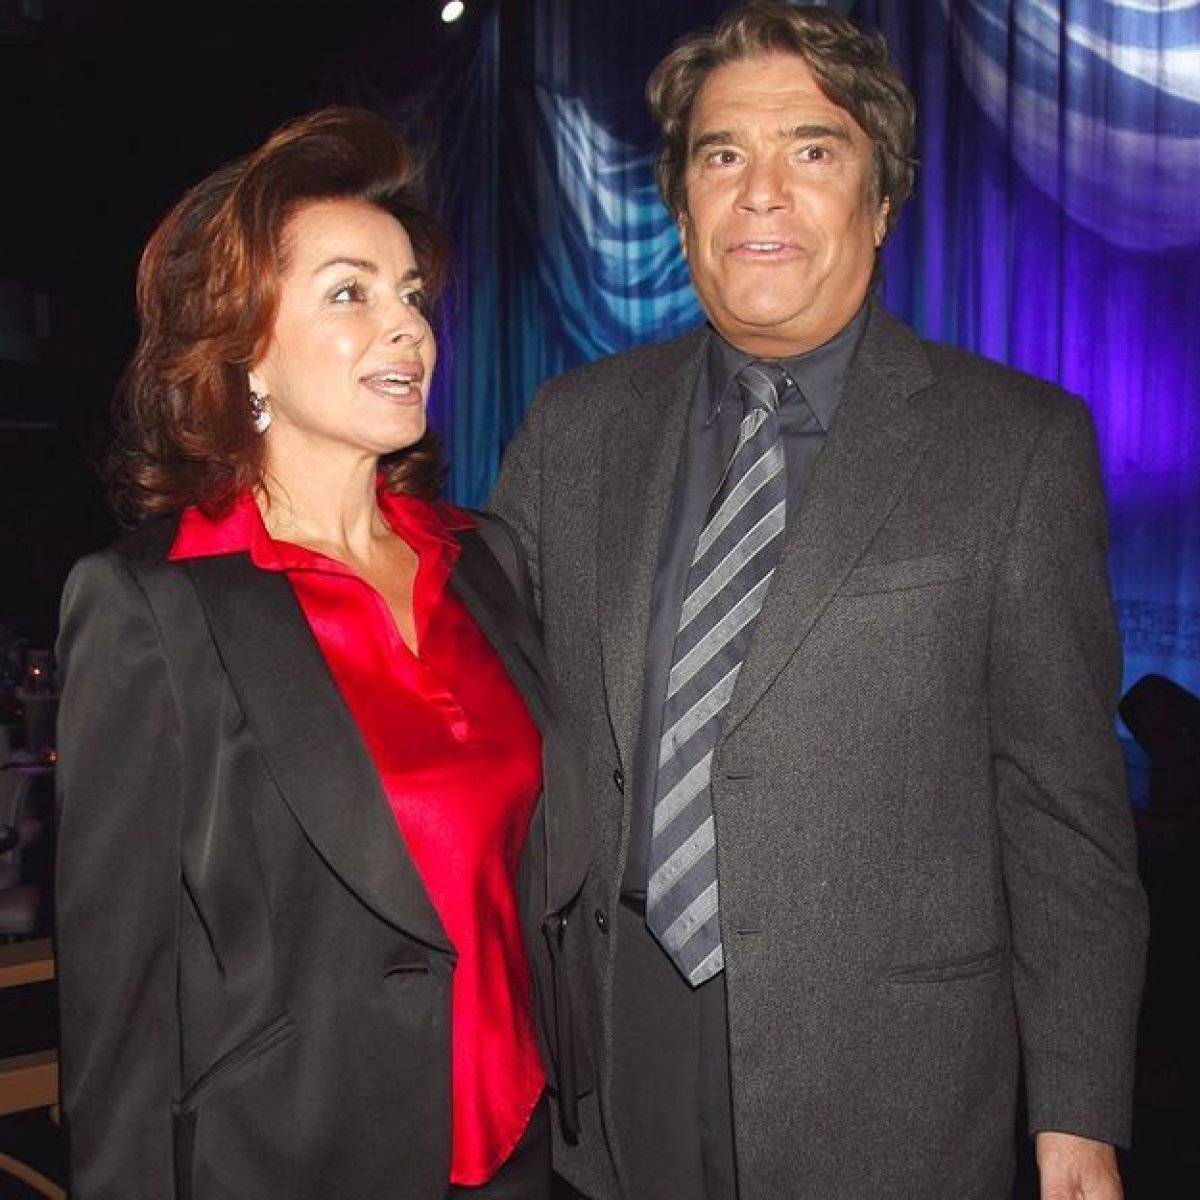 Bernard Tapie and his wife attacked by thieves in their home #3